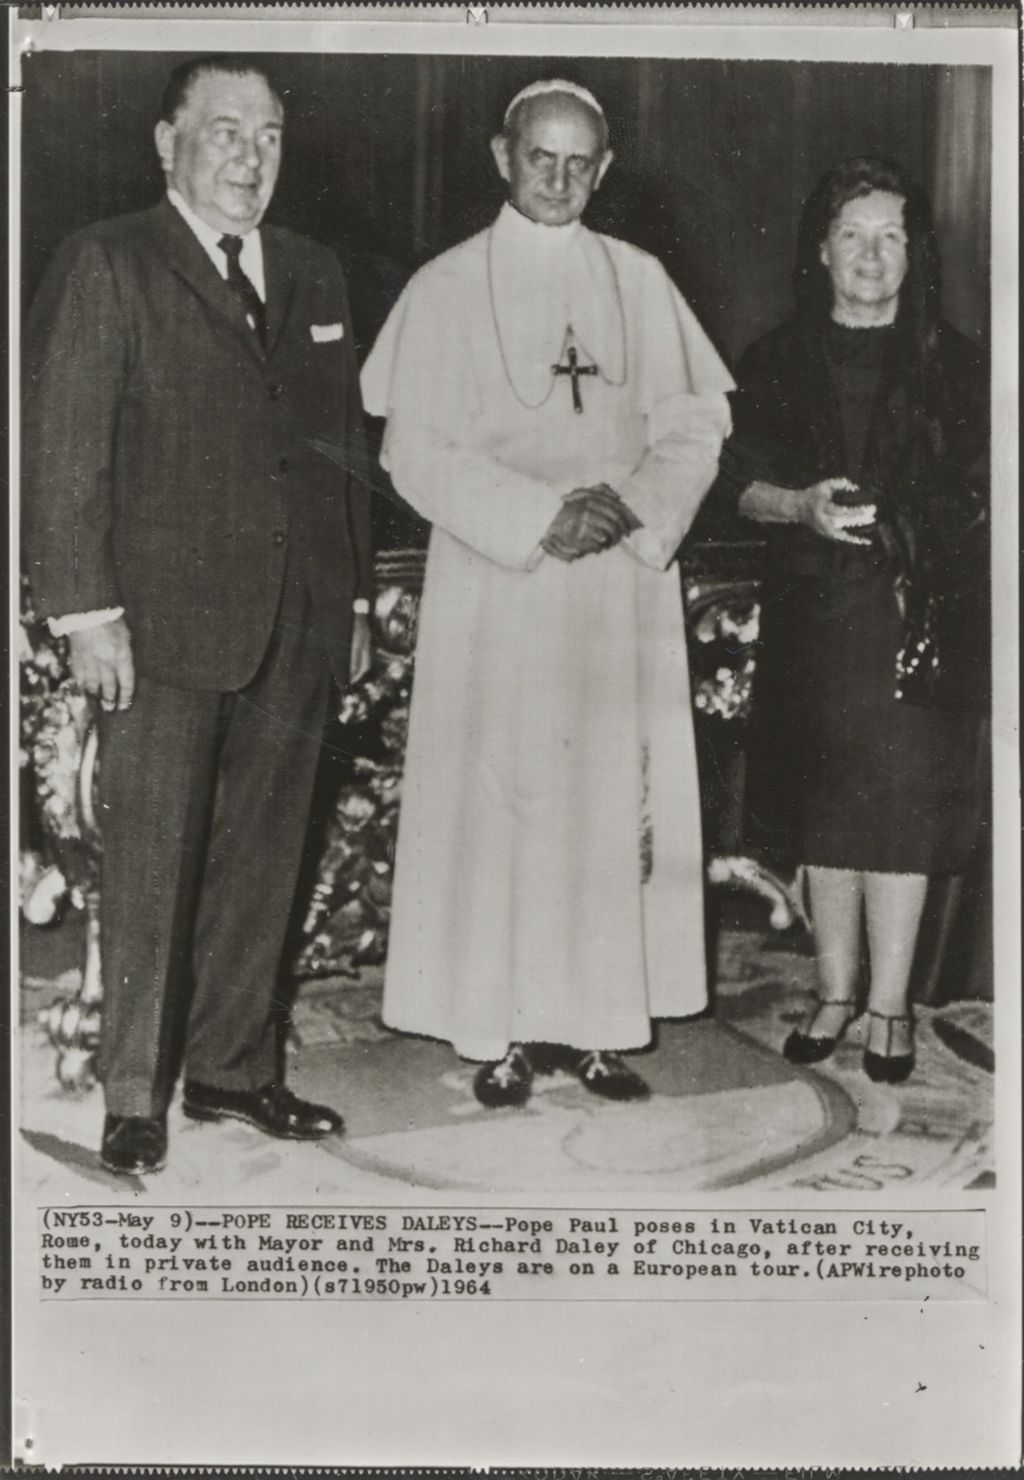 Miniature of Richard J. Daley and Eleanor Daley with Pope Paul VI during their trip to Rome